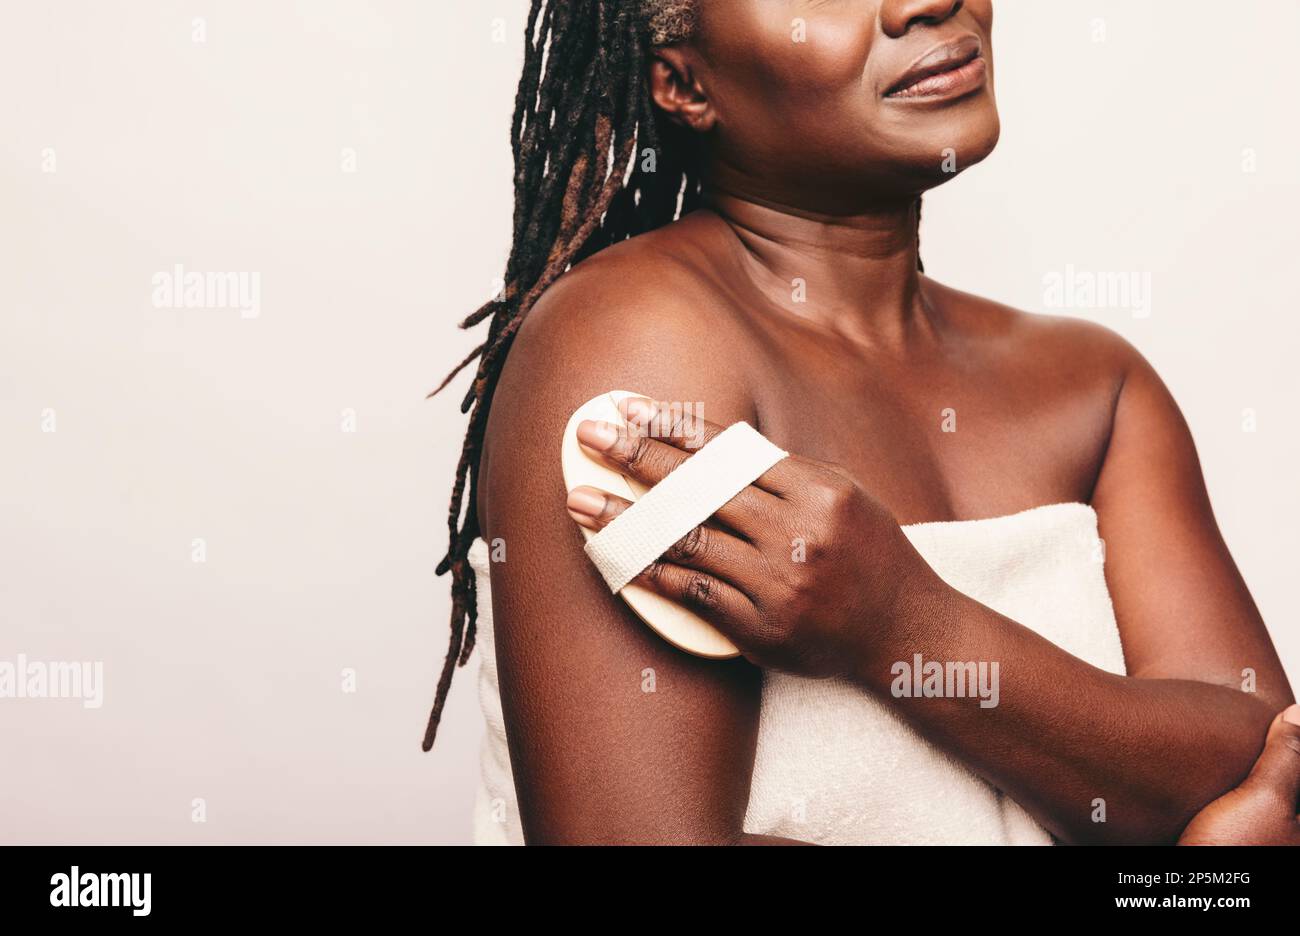 Mature woman exfoliating her skin with a brush against a studio background. Woman with dreadlocks dry brushing her arm while wrapped in a bath towel. Stock Photo